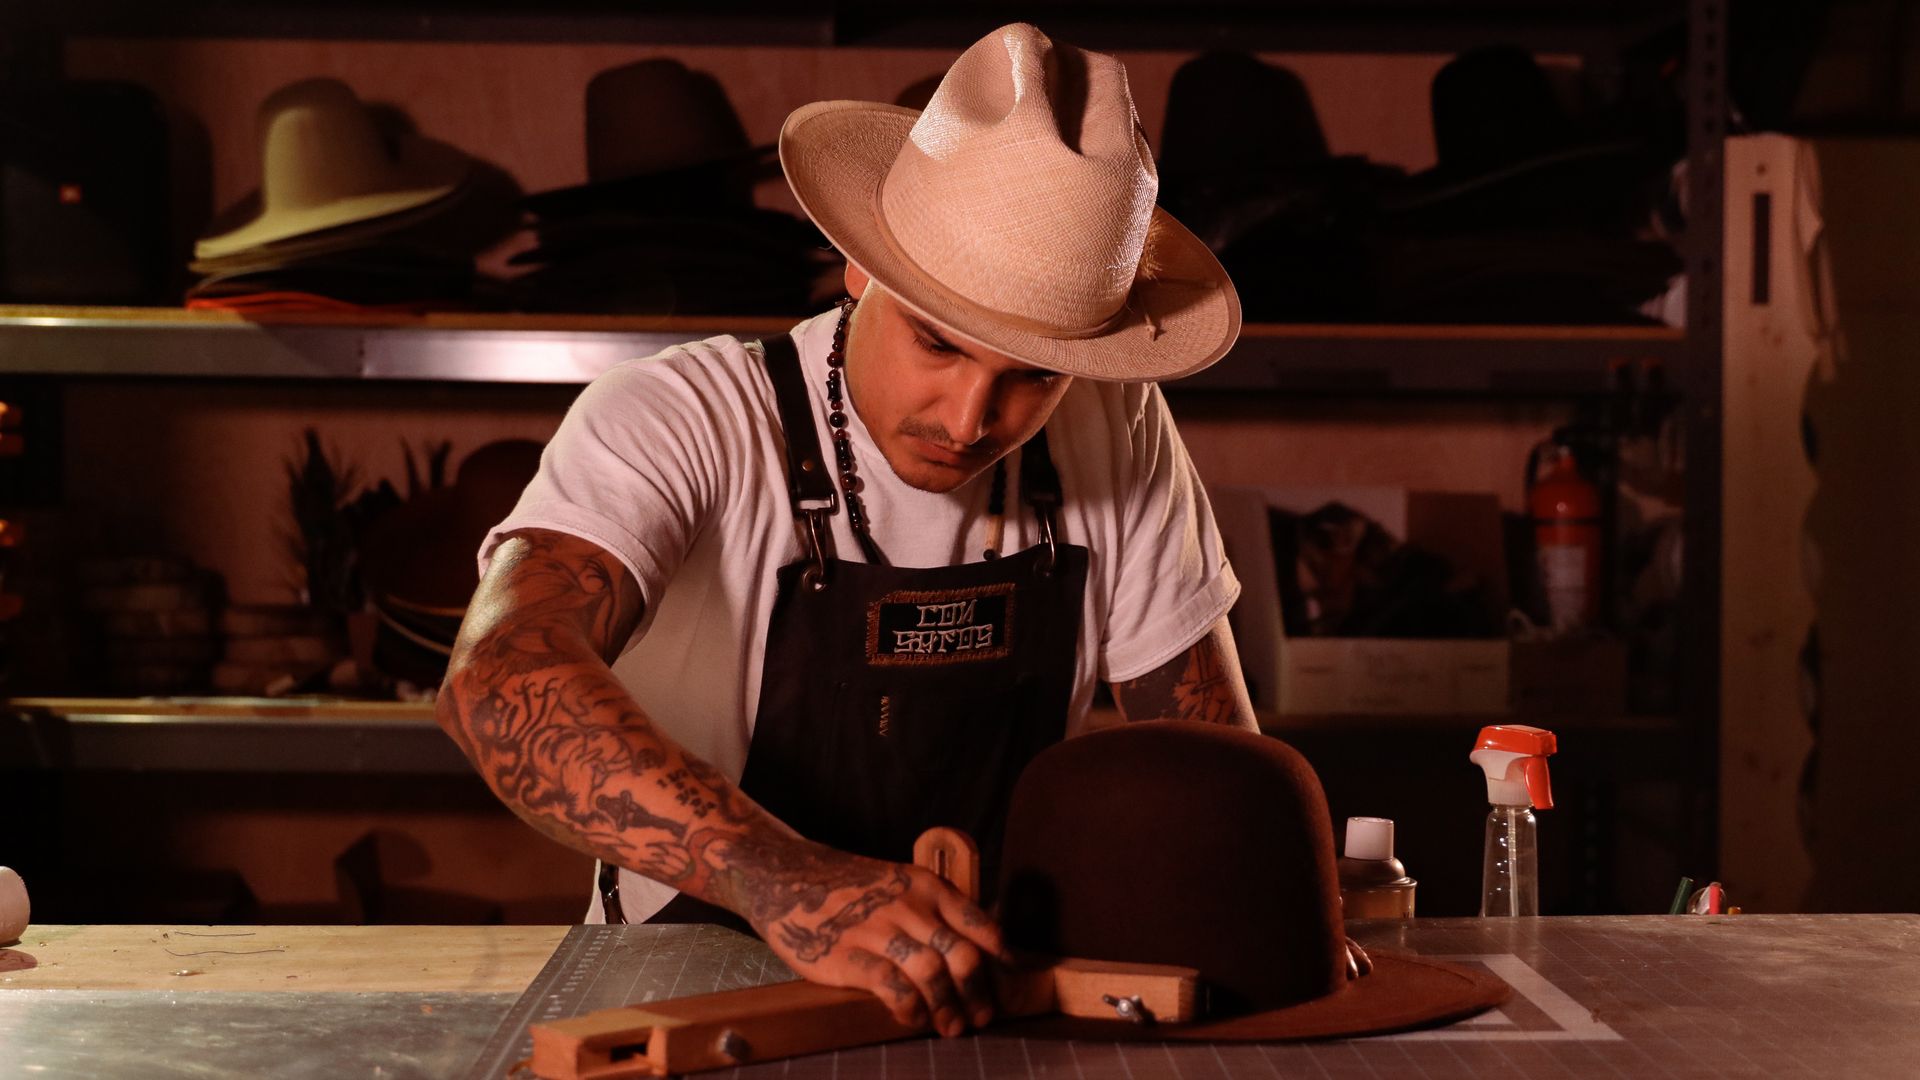 Gilbert Marquez Jr.,  founder and hatter of Pachuco Supply Company, works on making a hat in his Los Angeles shop.